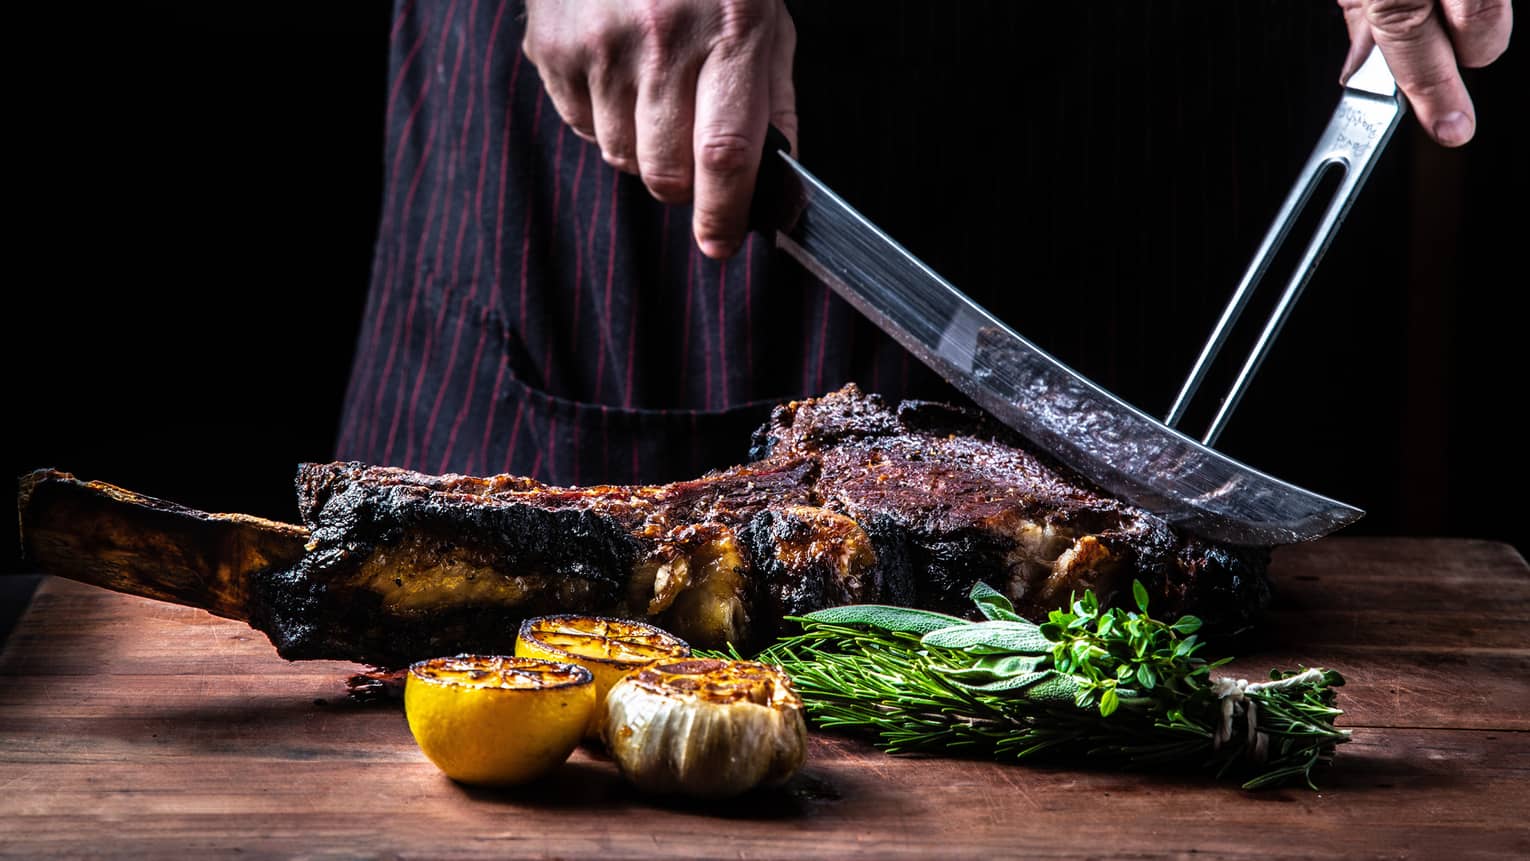 Close-up of chef slicing large rack of grilled meat, vegetables with butcher knives